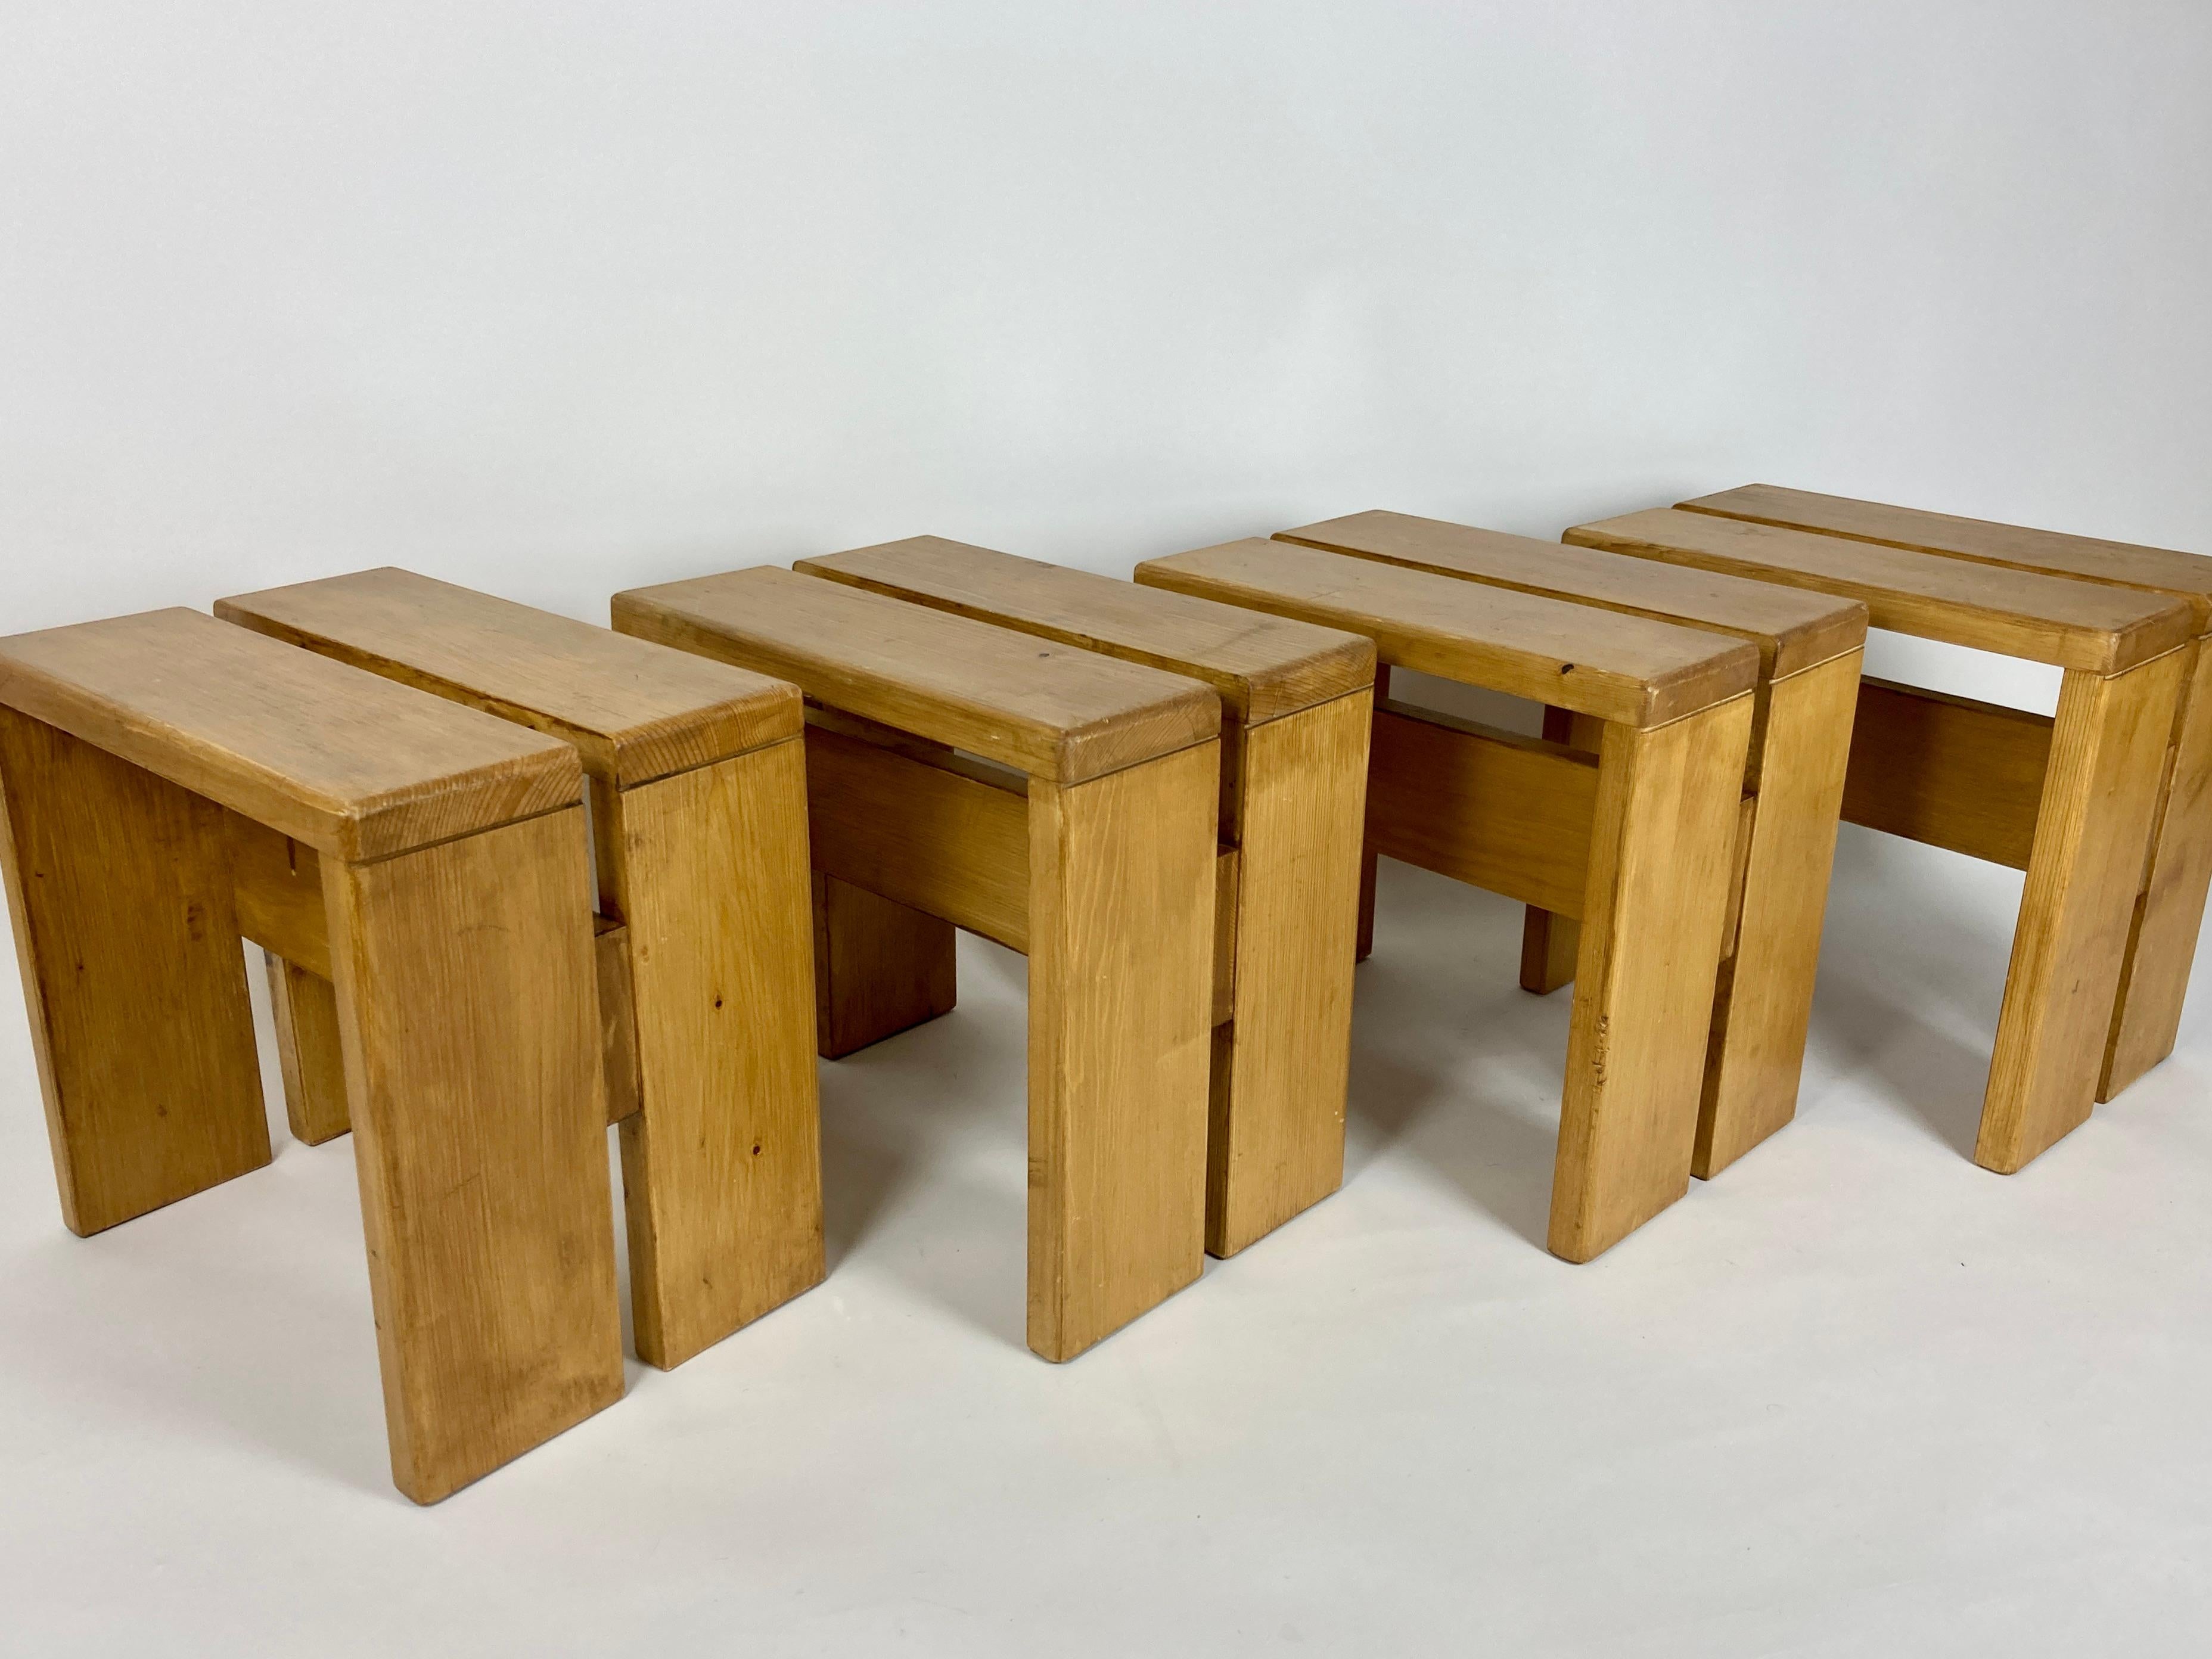 Pine Set of 4 Stools/Side Tables from Les Arcs, France 1970s, Charlotte Perriand